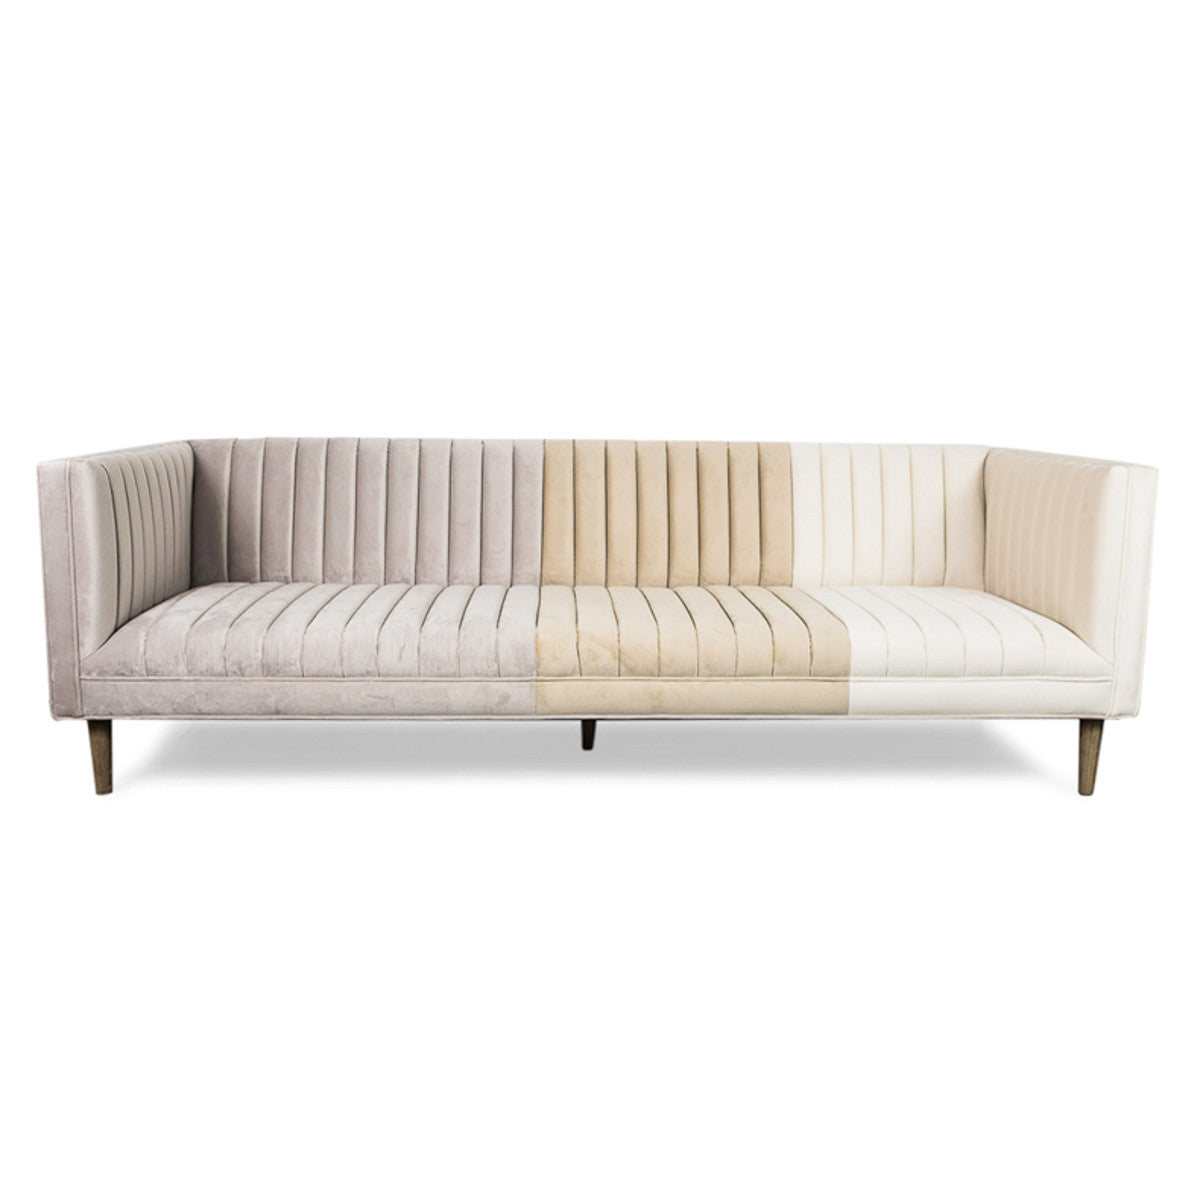 Featured image of post Cream Velvet Tufted Sofa : Update your living space fashionably with this gorgeous living room set.